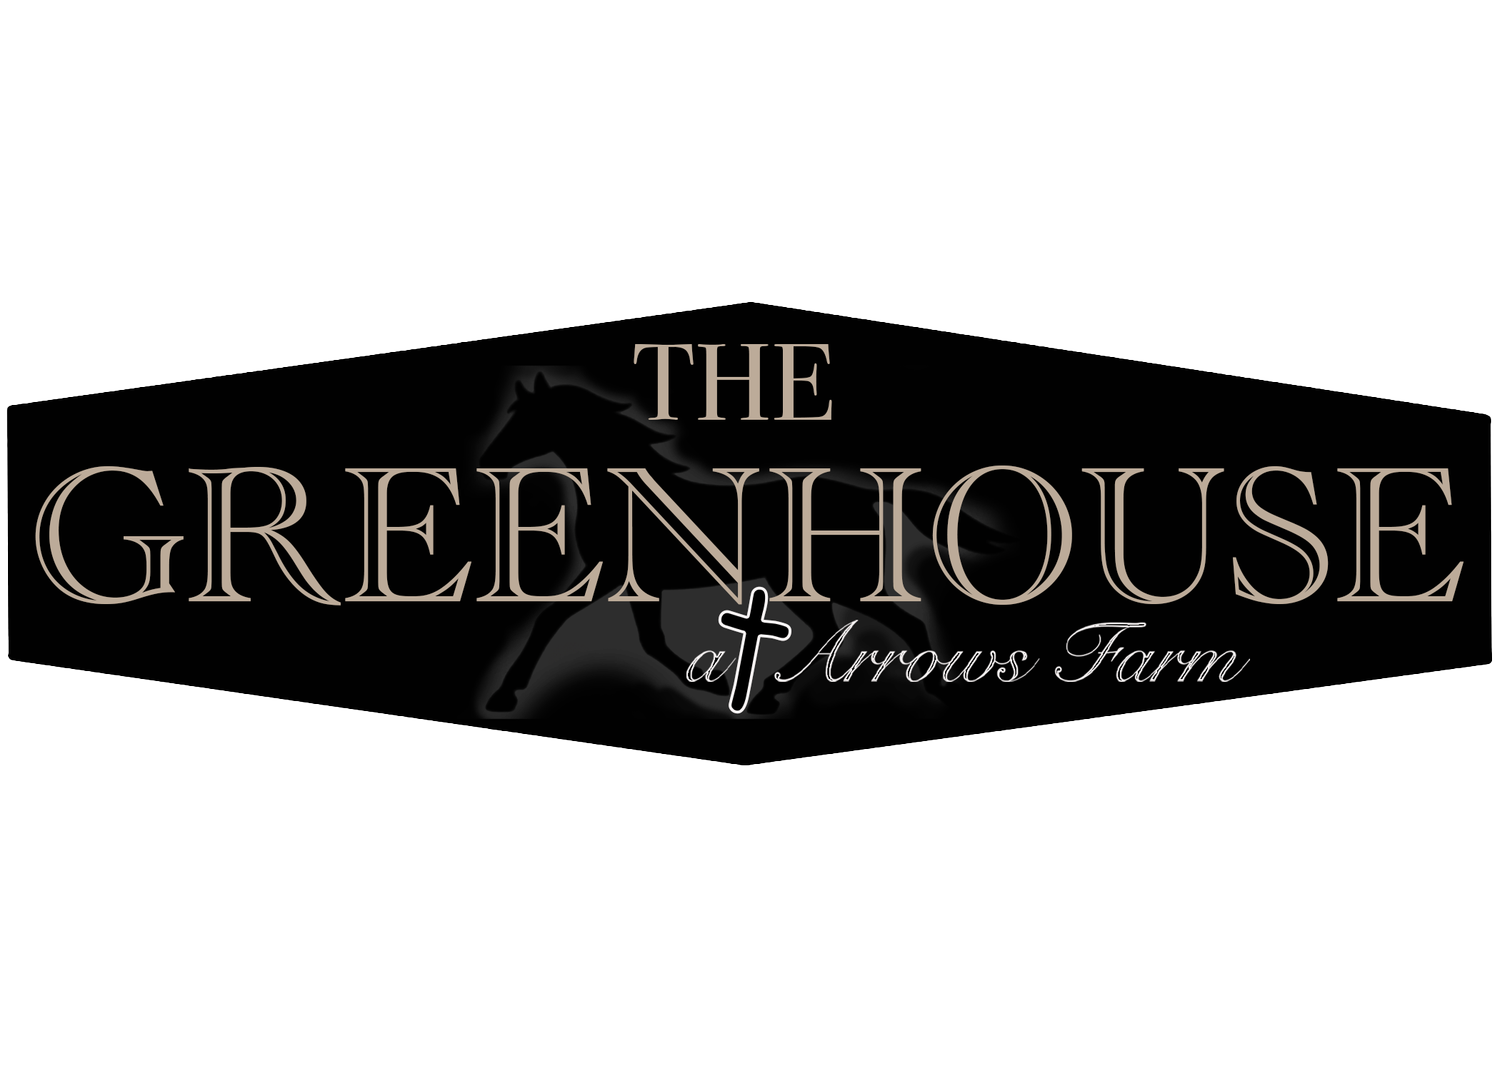 The Greenhouse at Arrows farm